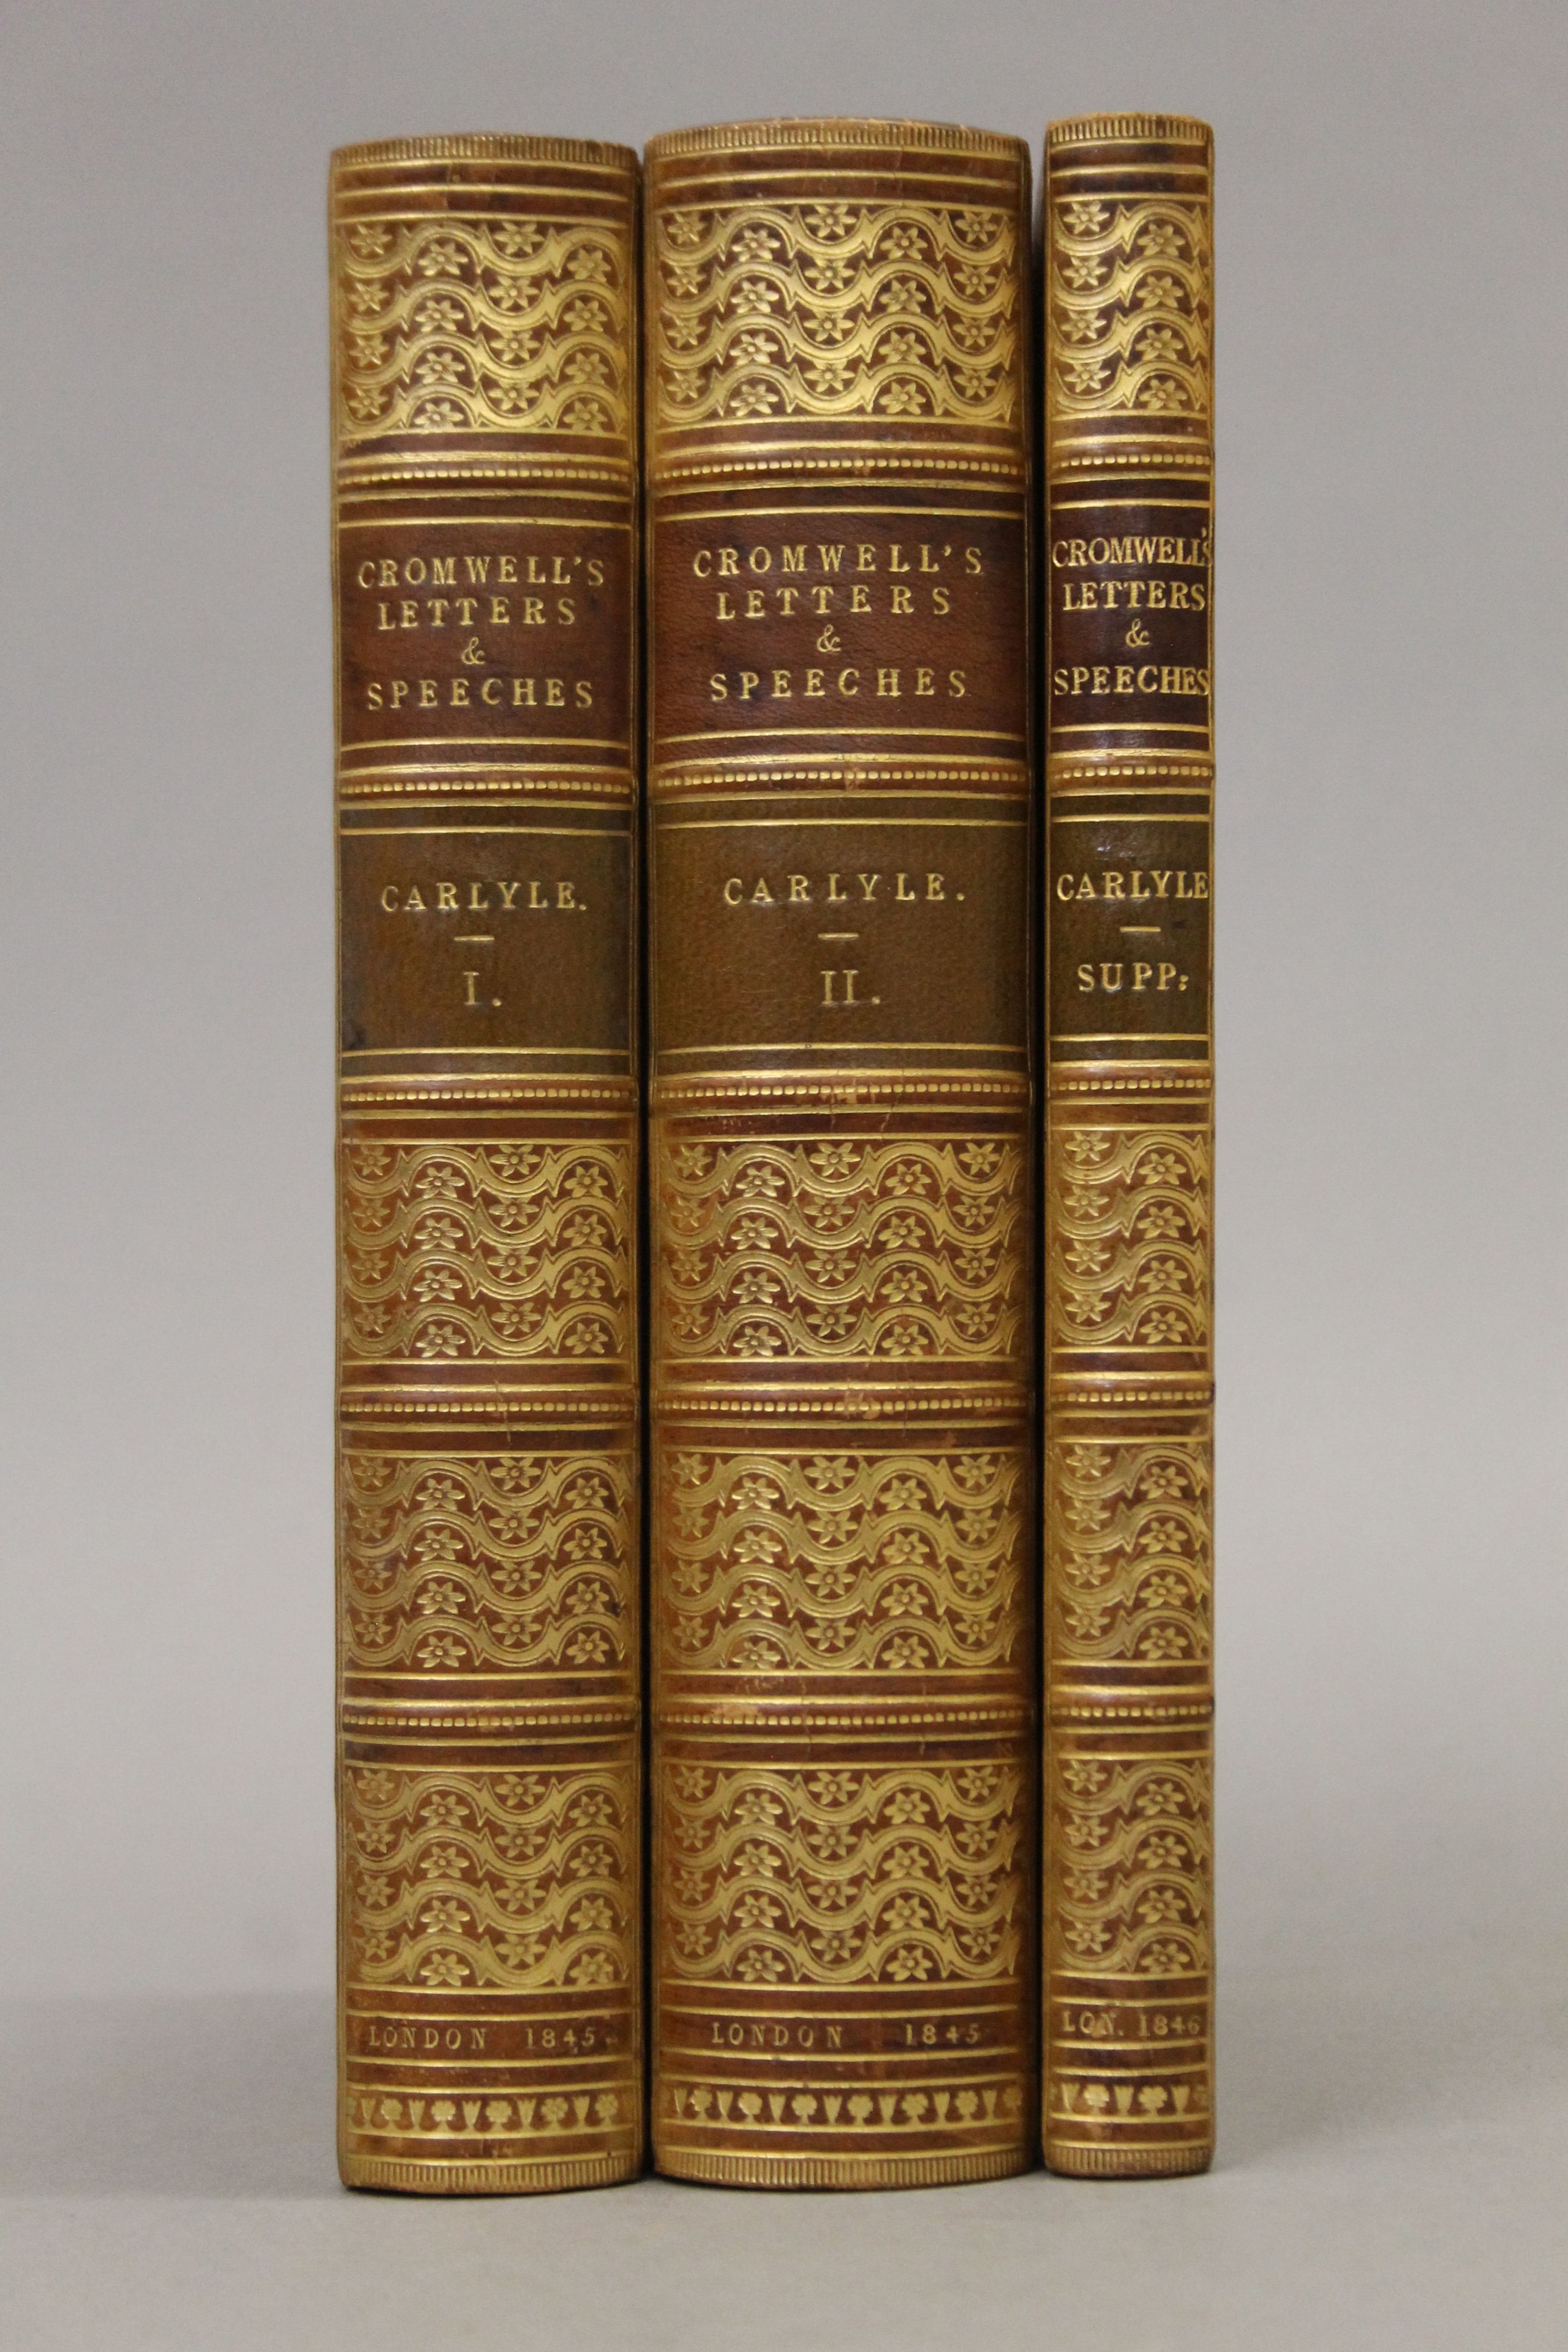 Carlyle (Thomas), Oliver Cromwell's Letters and Speeches, first edition, 3 vols, - Image 10 of 16